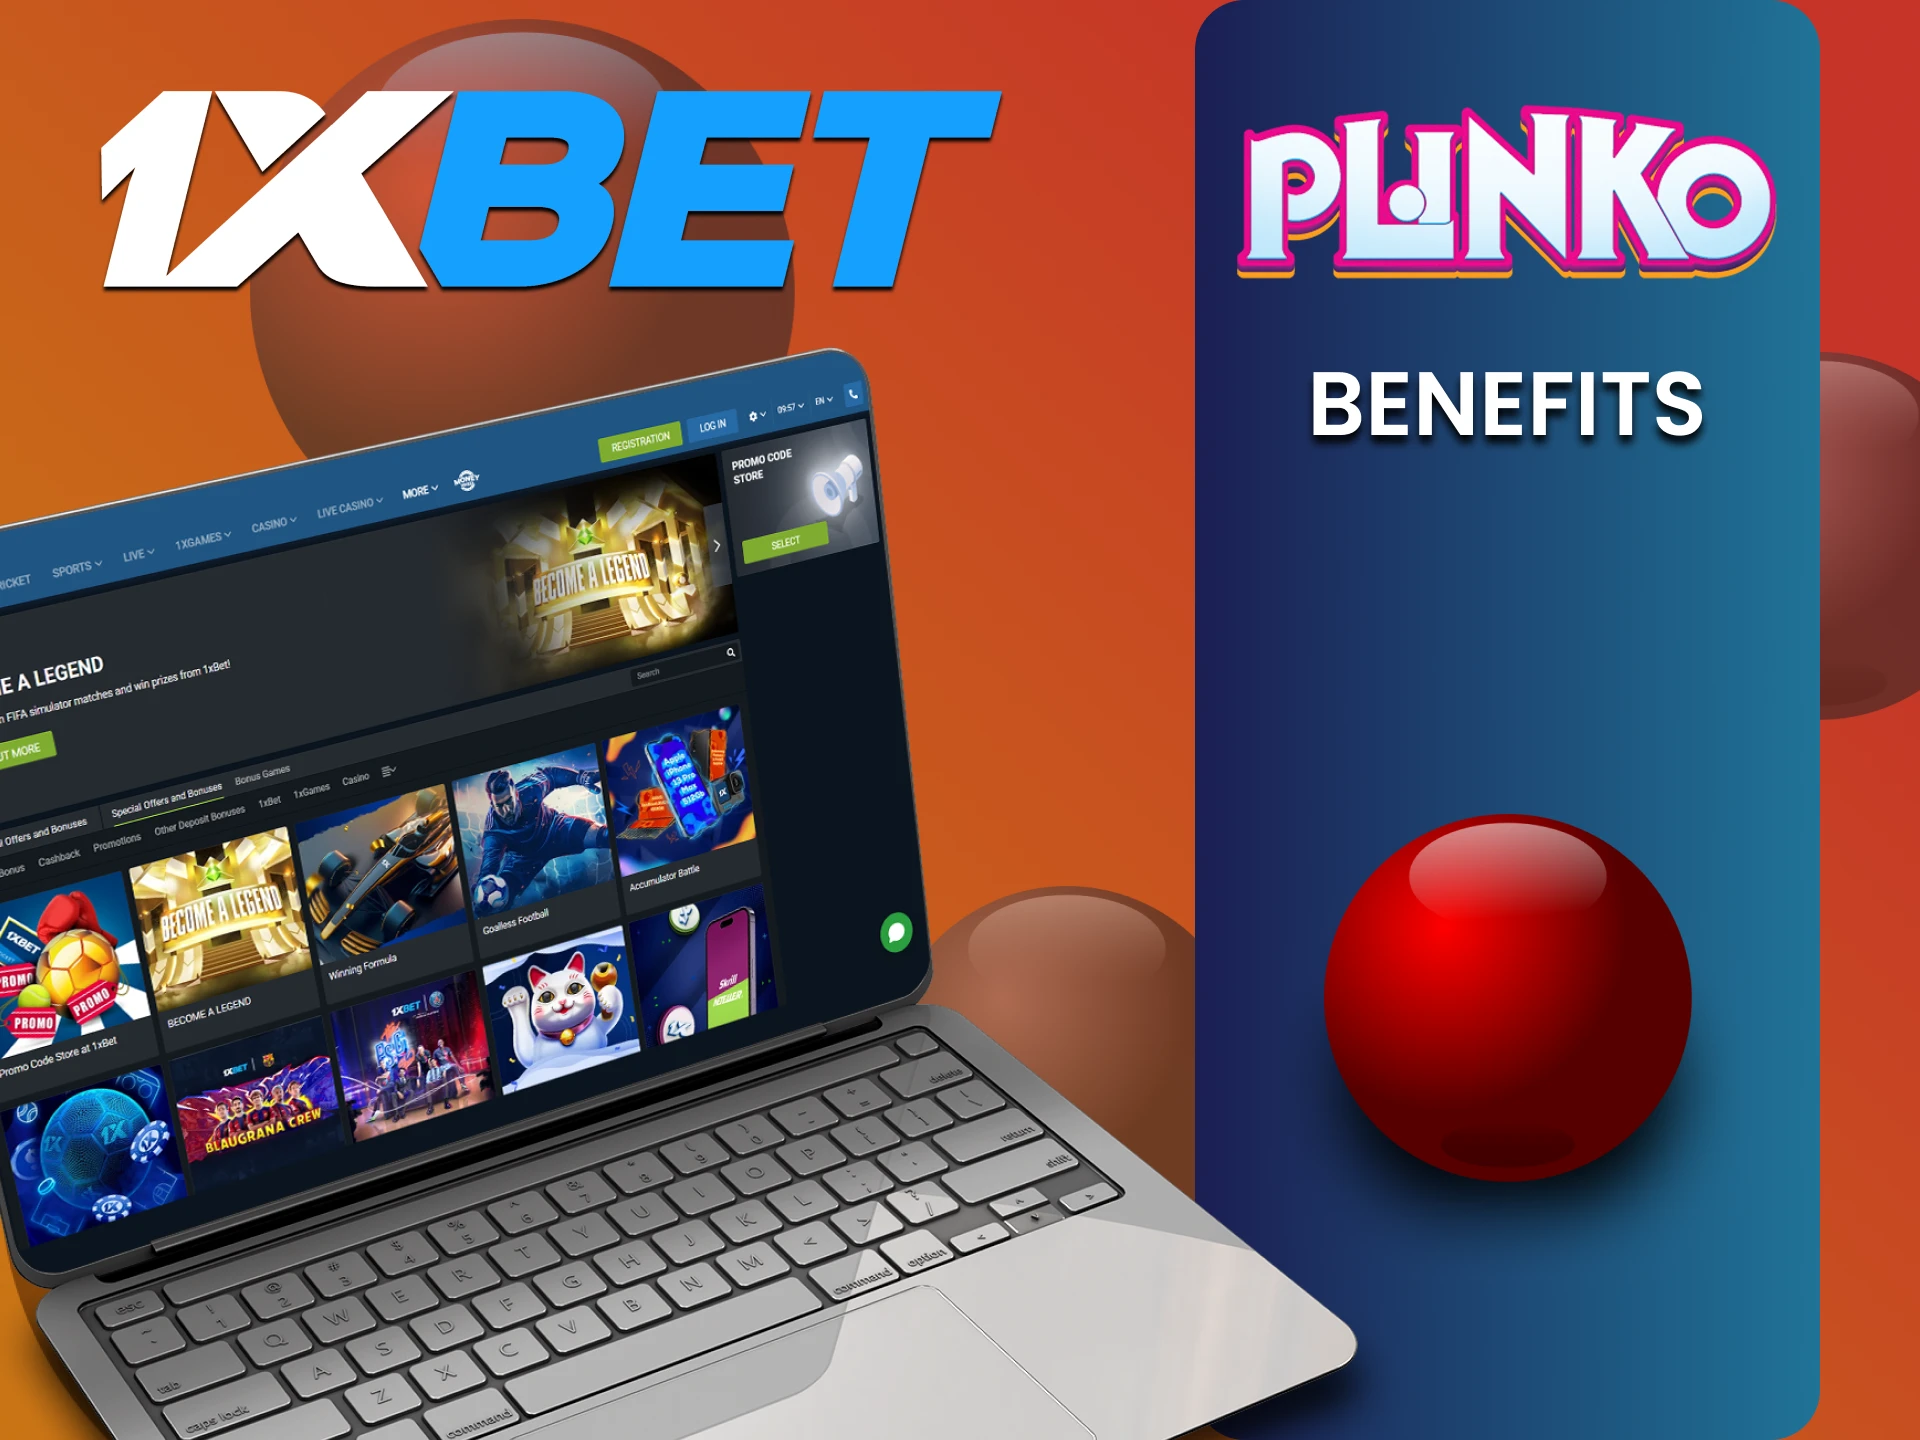 Find out about the benefits of 1xbet for playing Plinko.